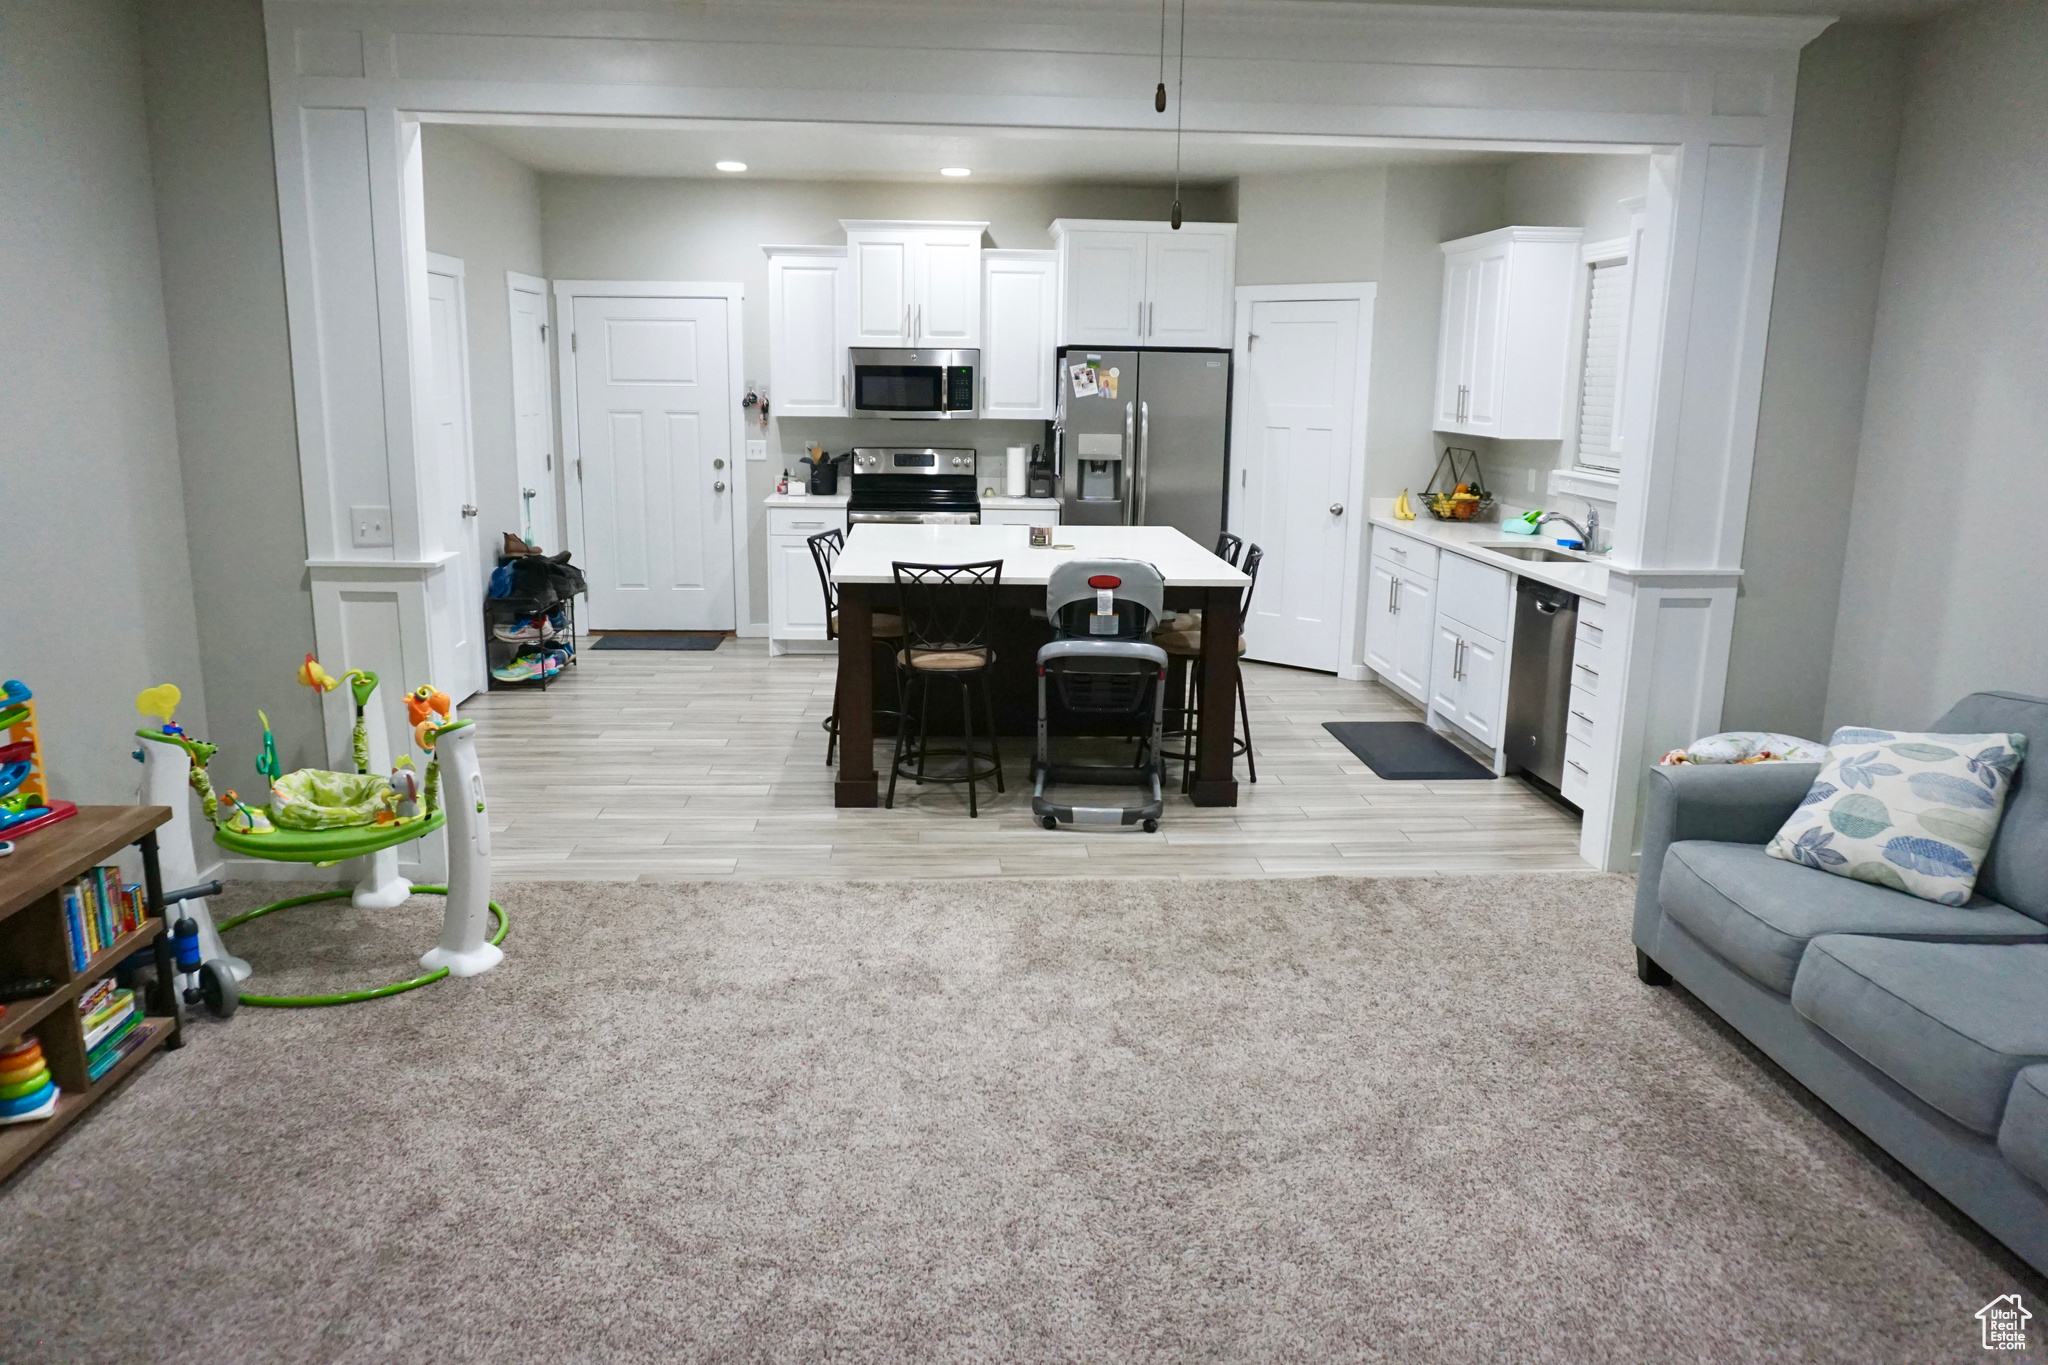 Carpeted living room and tiled kitchen with stainless steel appliances, center island, white cabinets, and sink